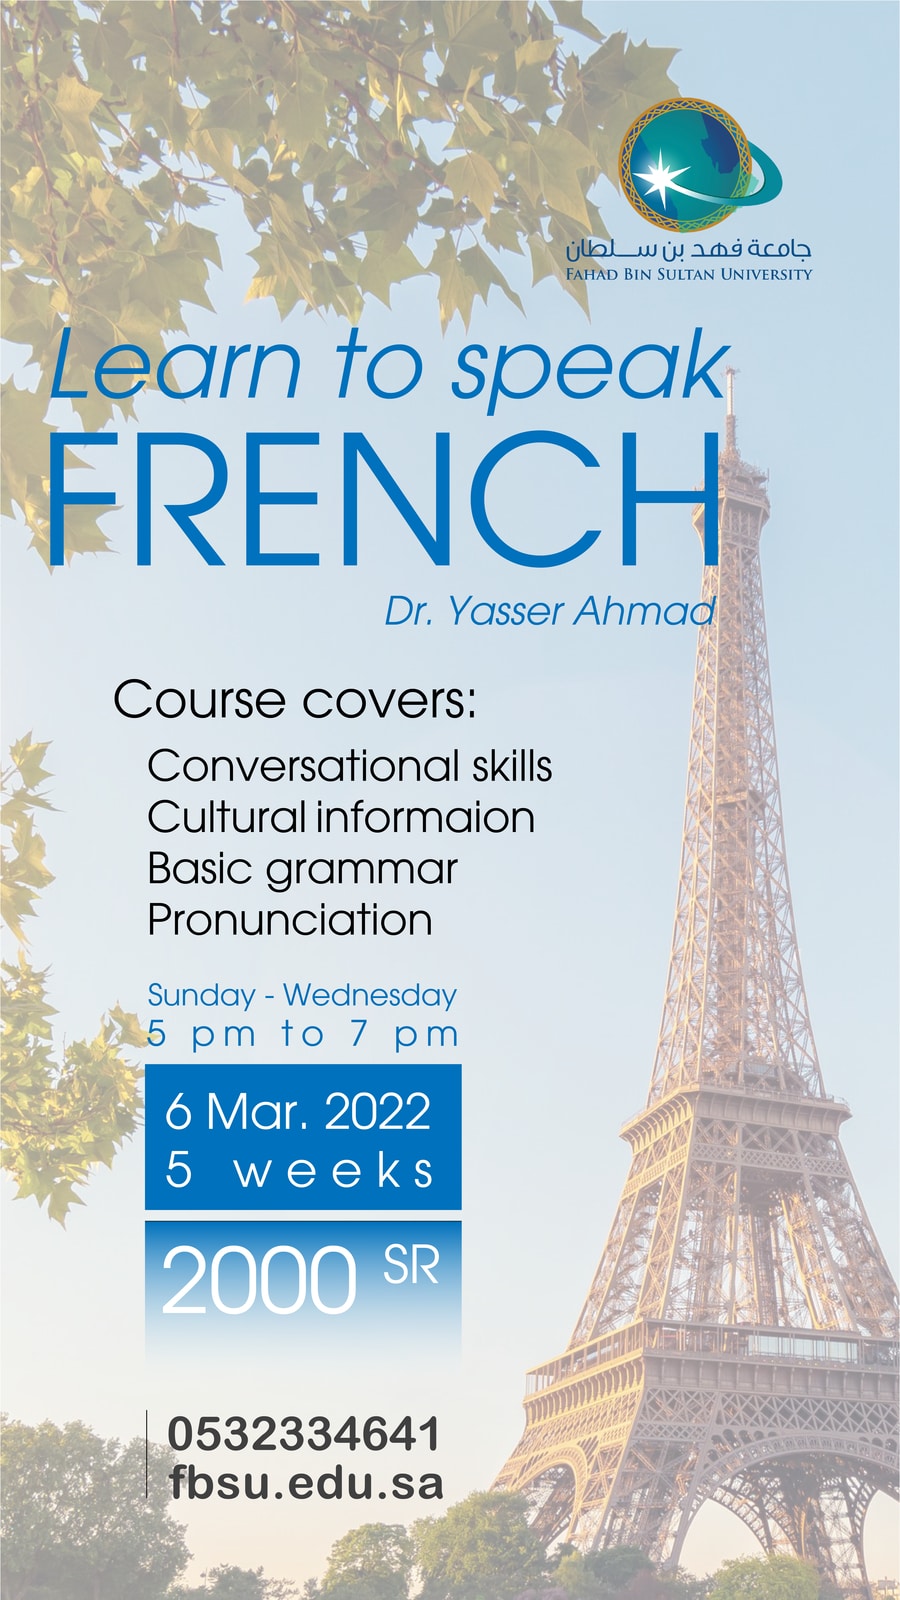 Learn to speak FRENCH